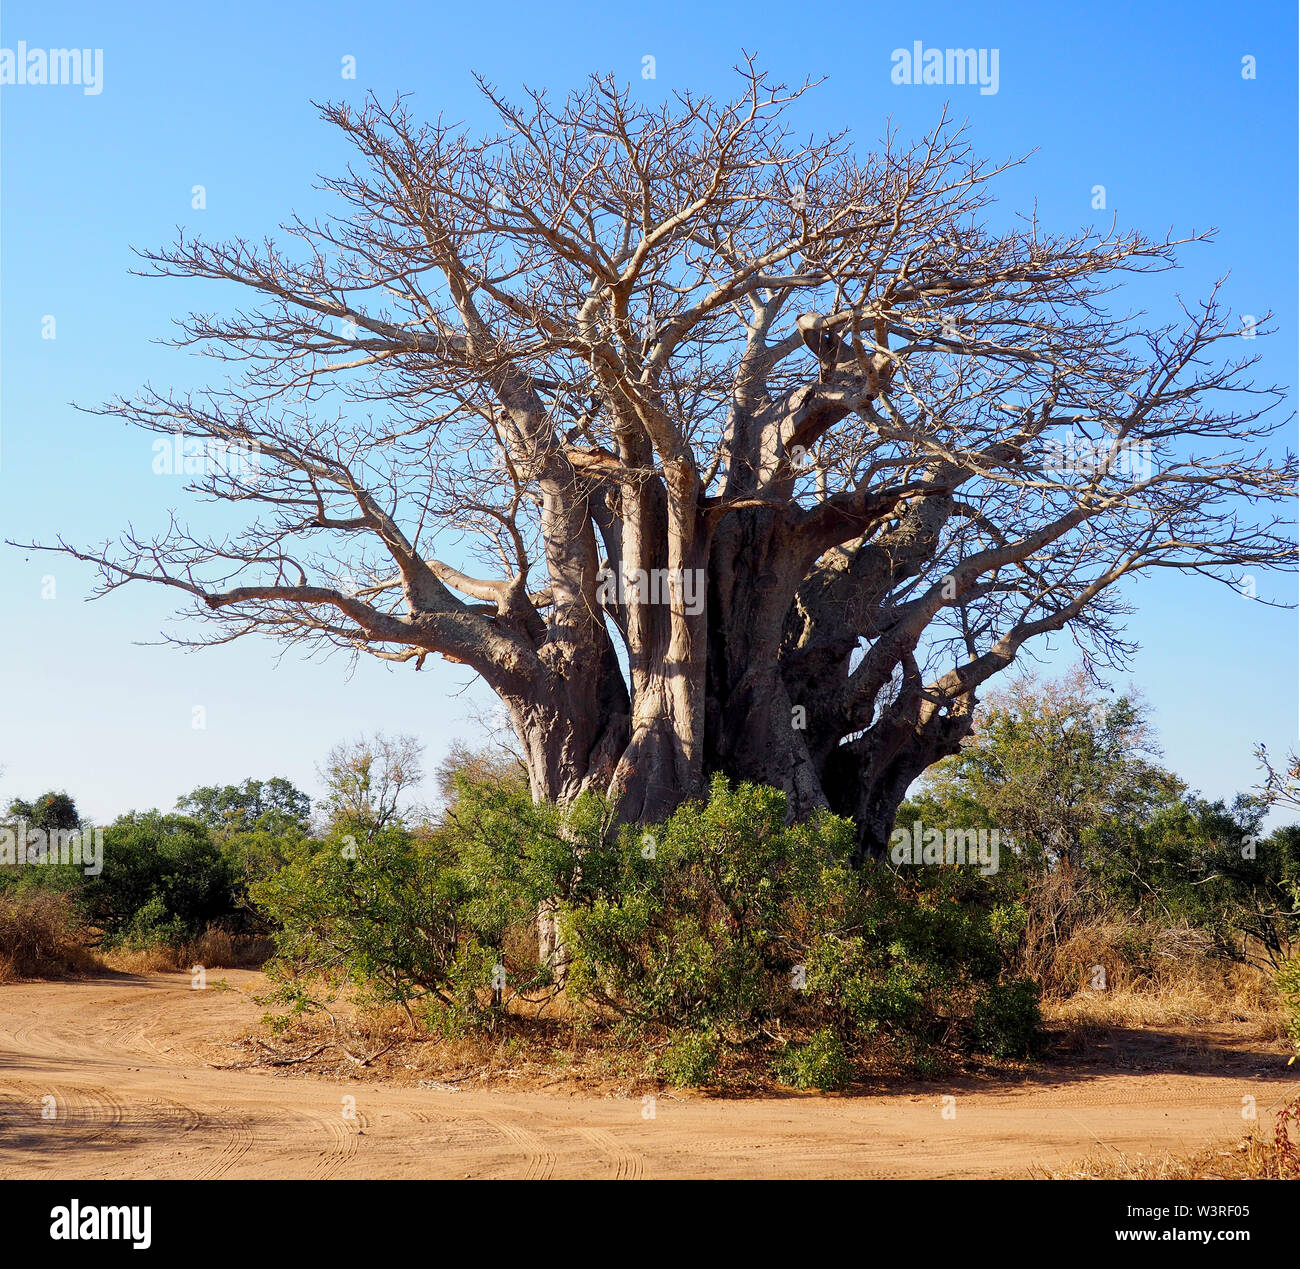 Huge baobab tree in South Africa Stock Photo